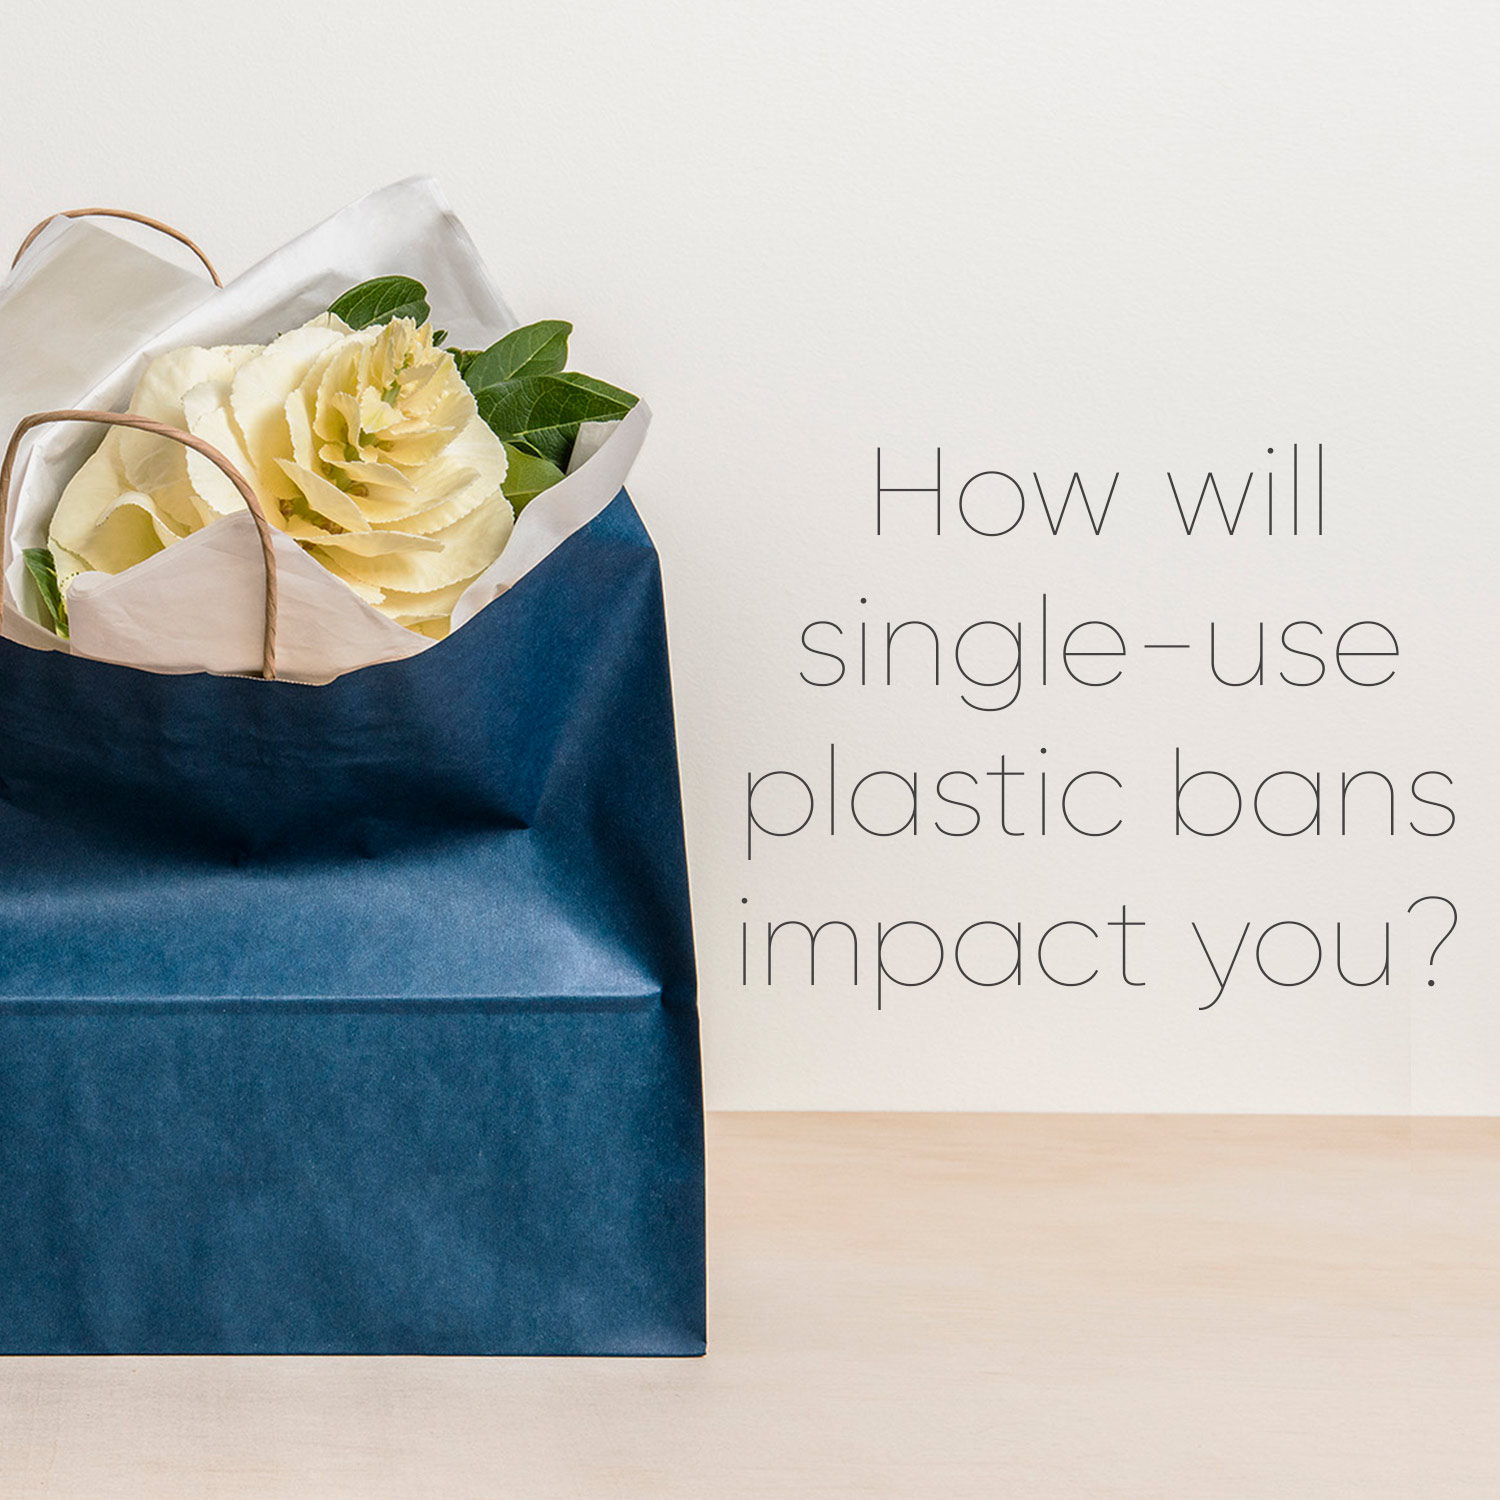 Image showing paper bag with text how will single use plastic bans impact you